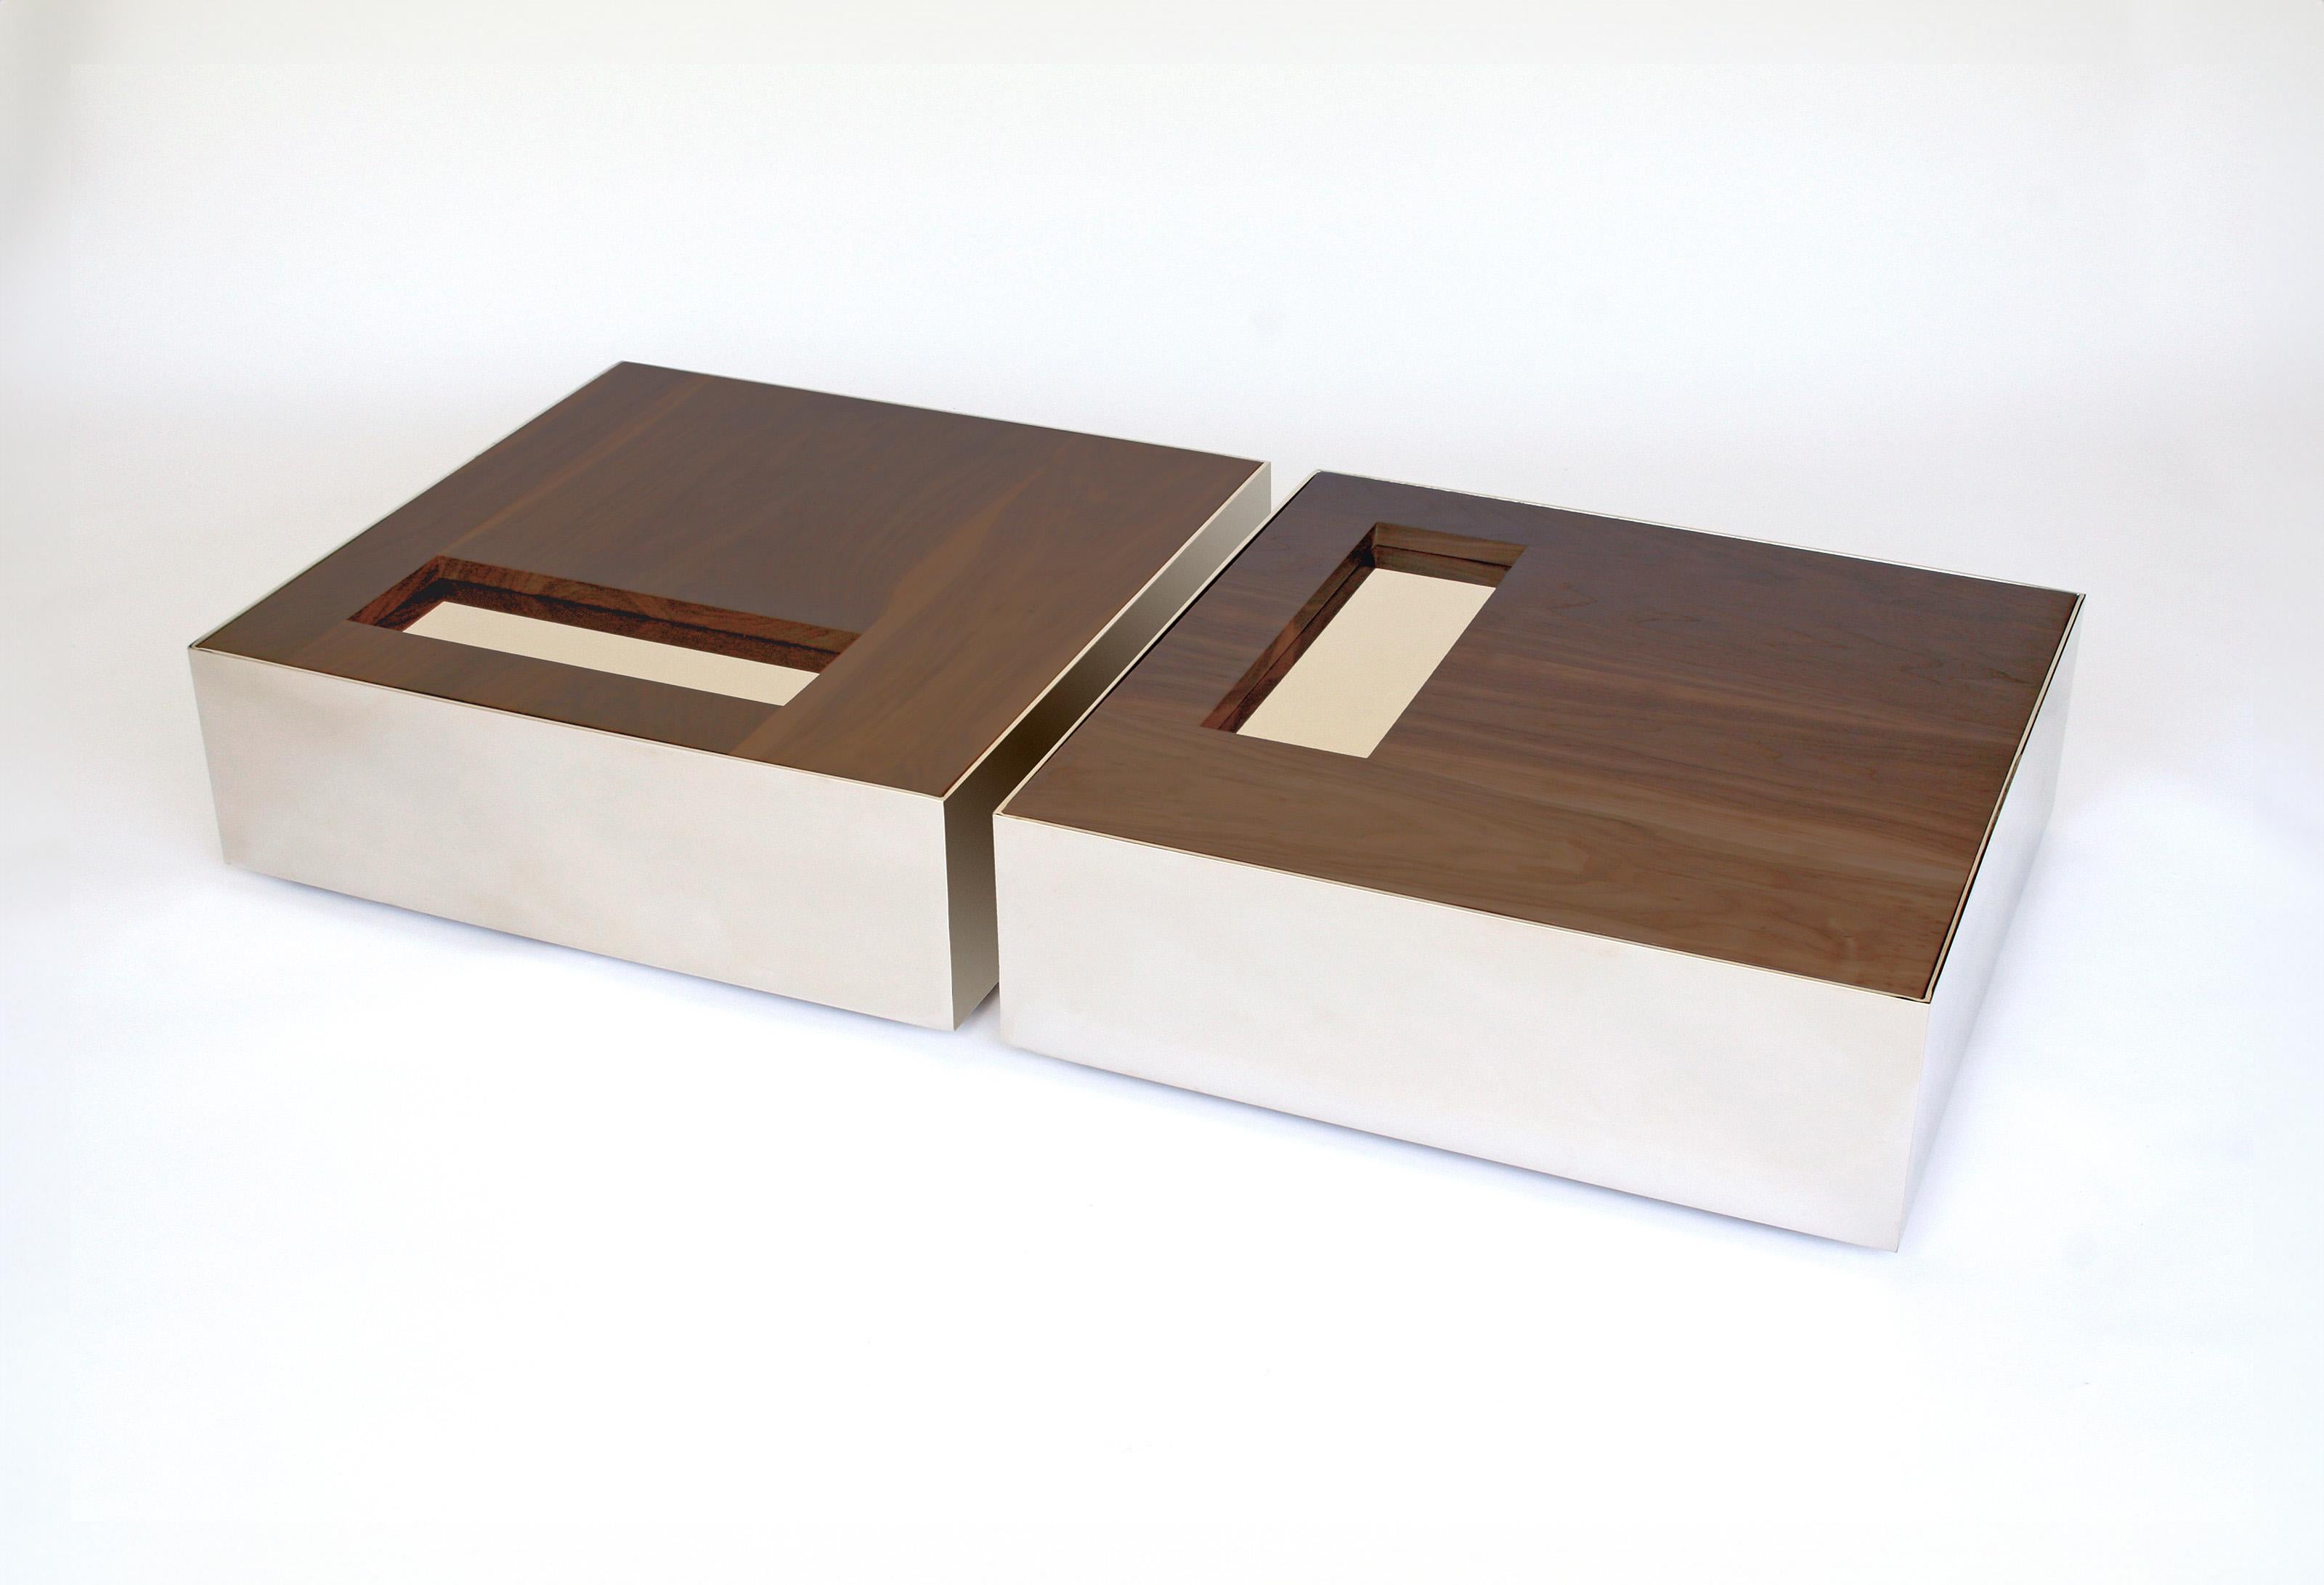 Set Of 2 Walnut Ballot Coffee Tables by Phase Design
Dimensions: D 76,2 x W 76,2 x H 25,4 cm.
Materials: Walnut and white powder-coated metal.

Steel coffee table with solid wood top, available in walnut, white oak, or ebonized oak. Available in